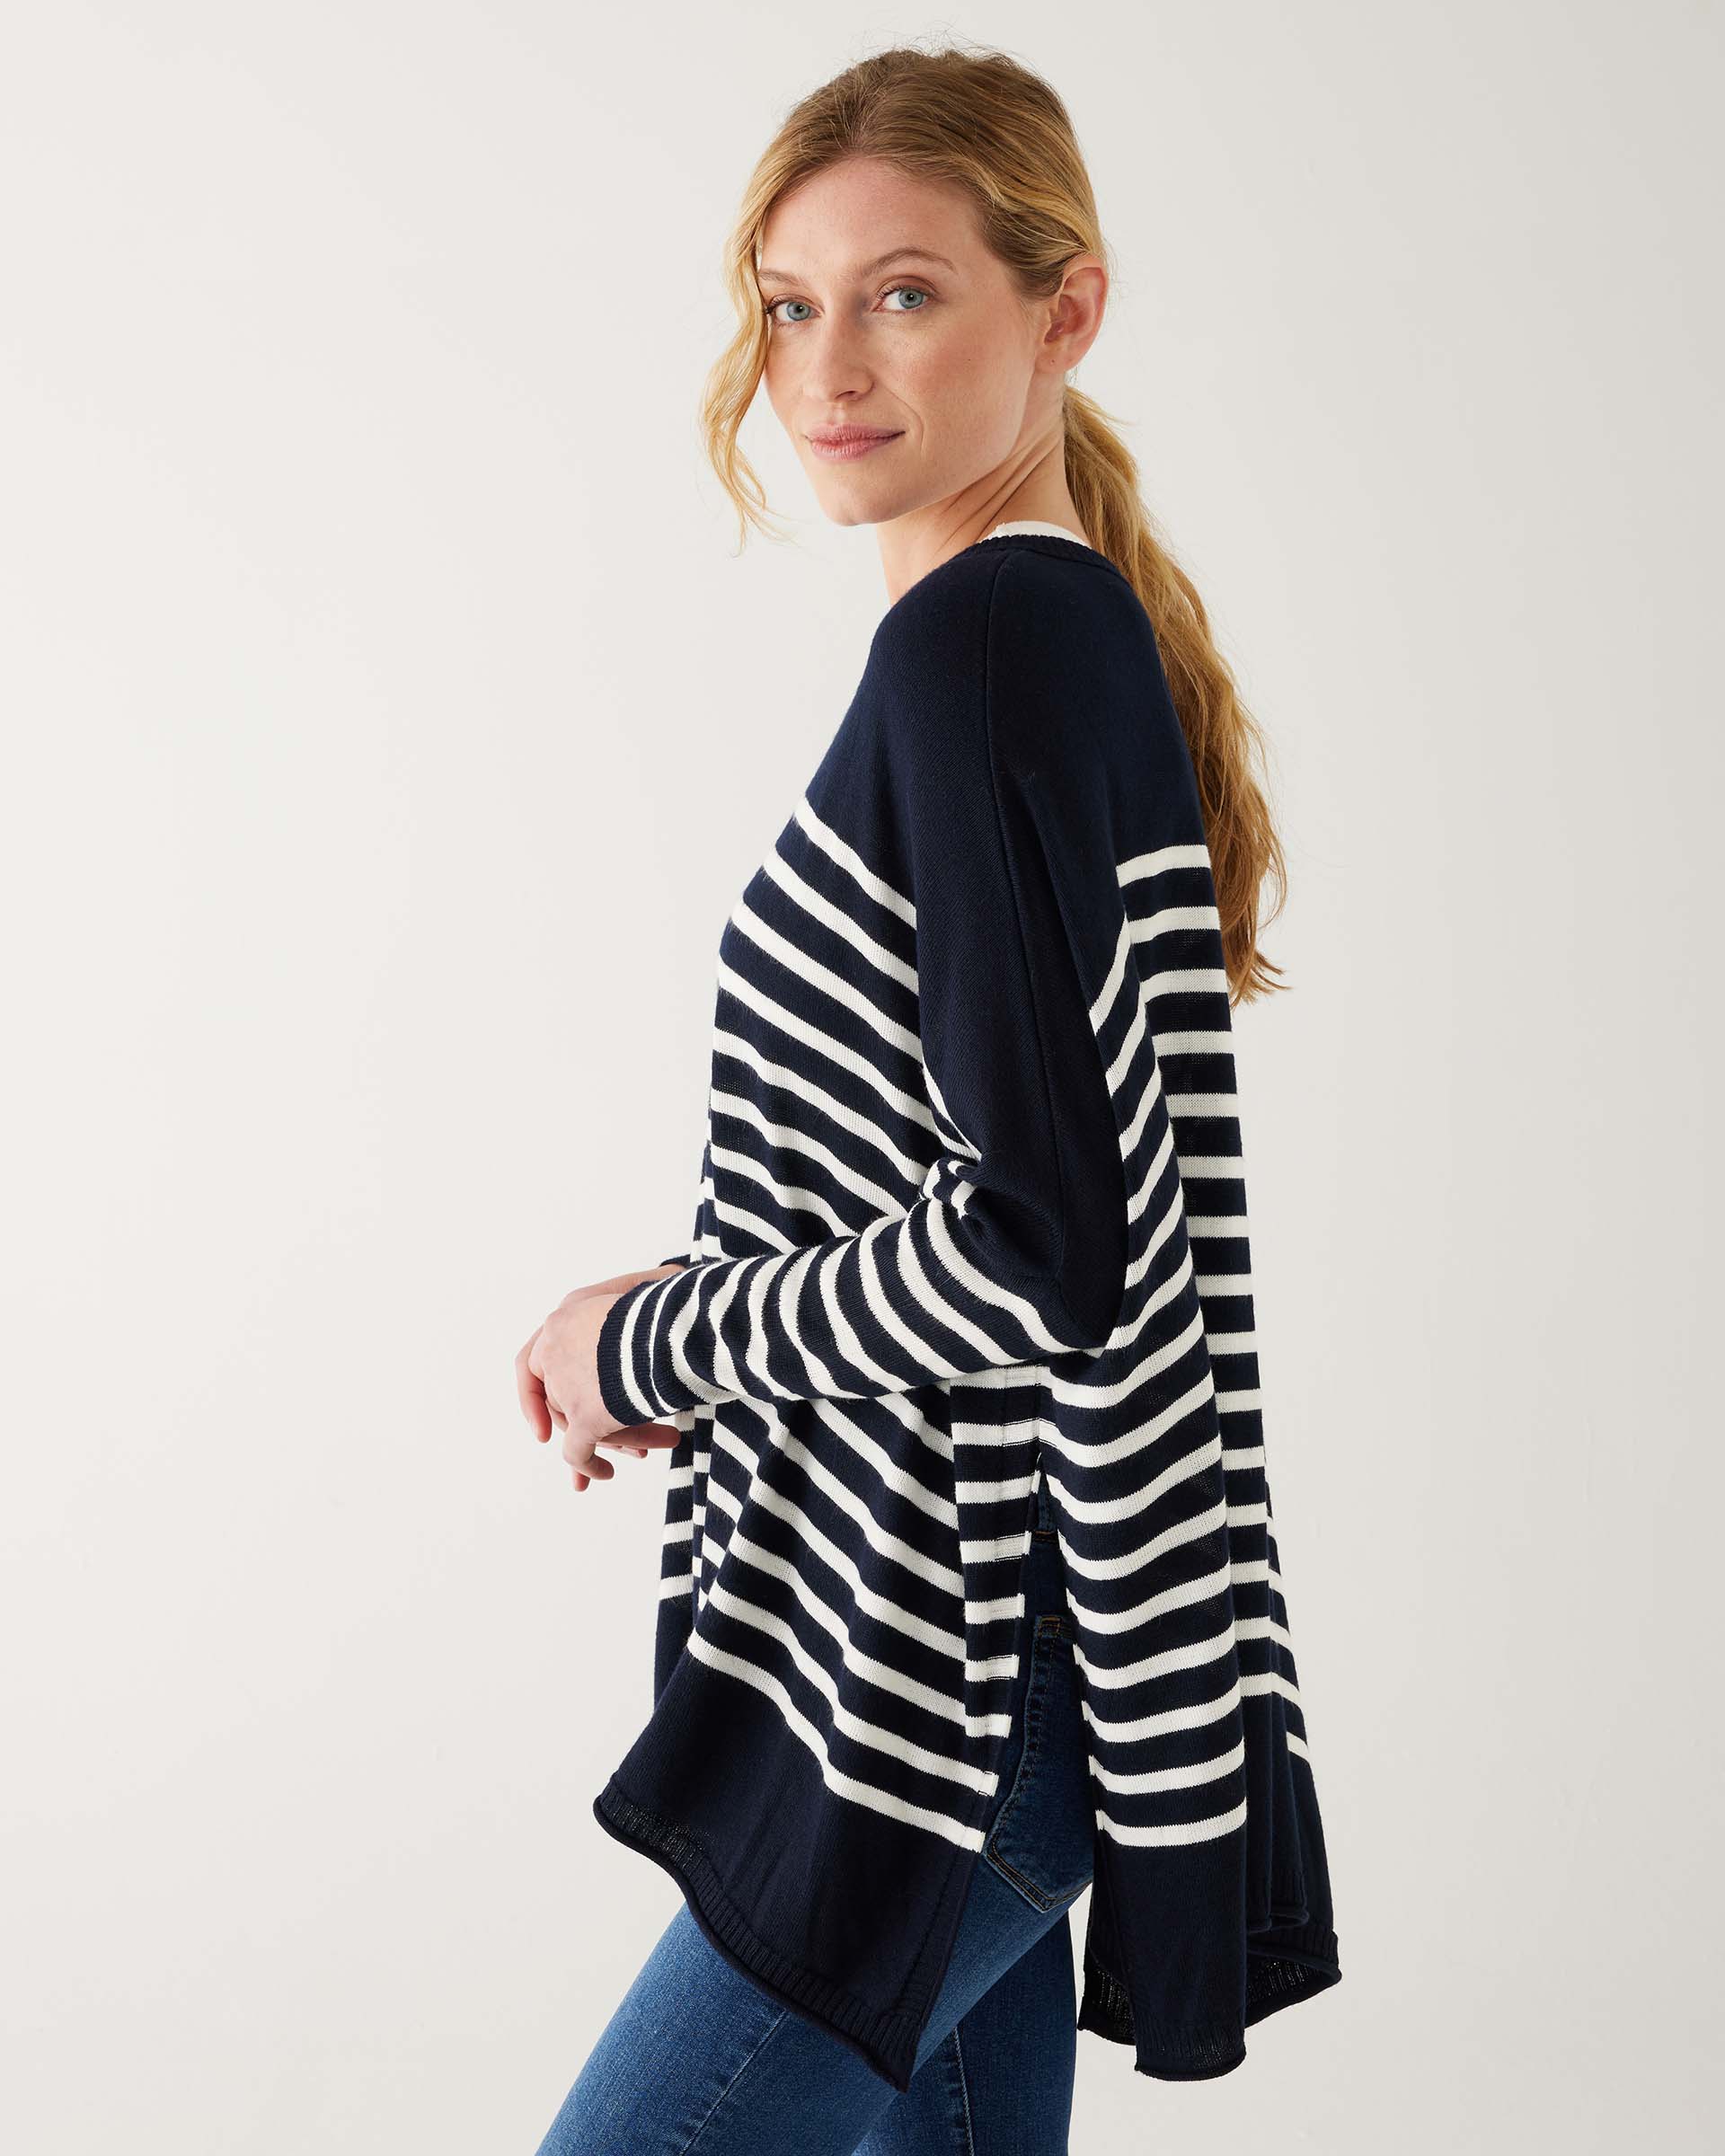 female wearing navy and white striped sweater with blue jeans sideways on a white background